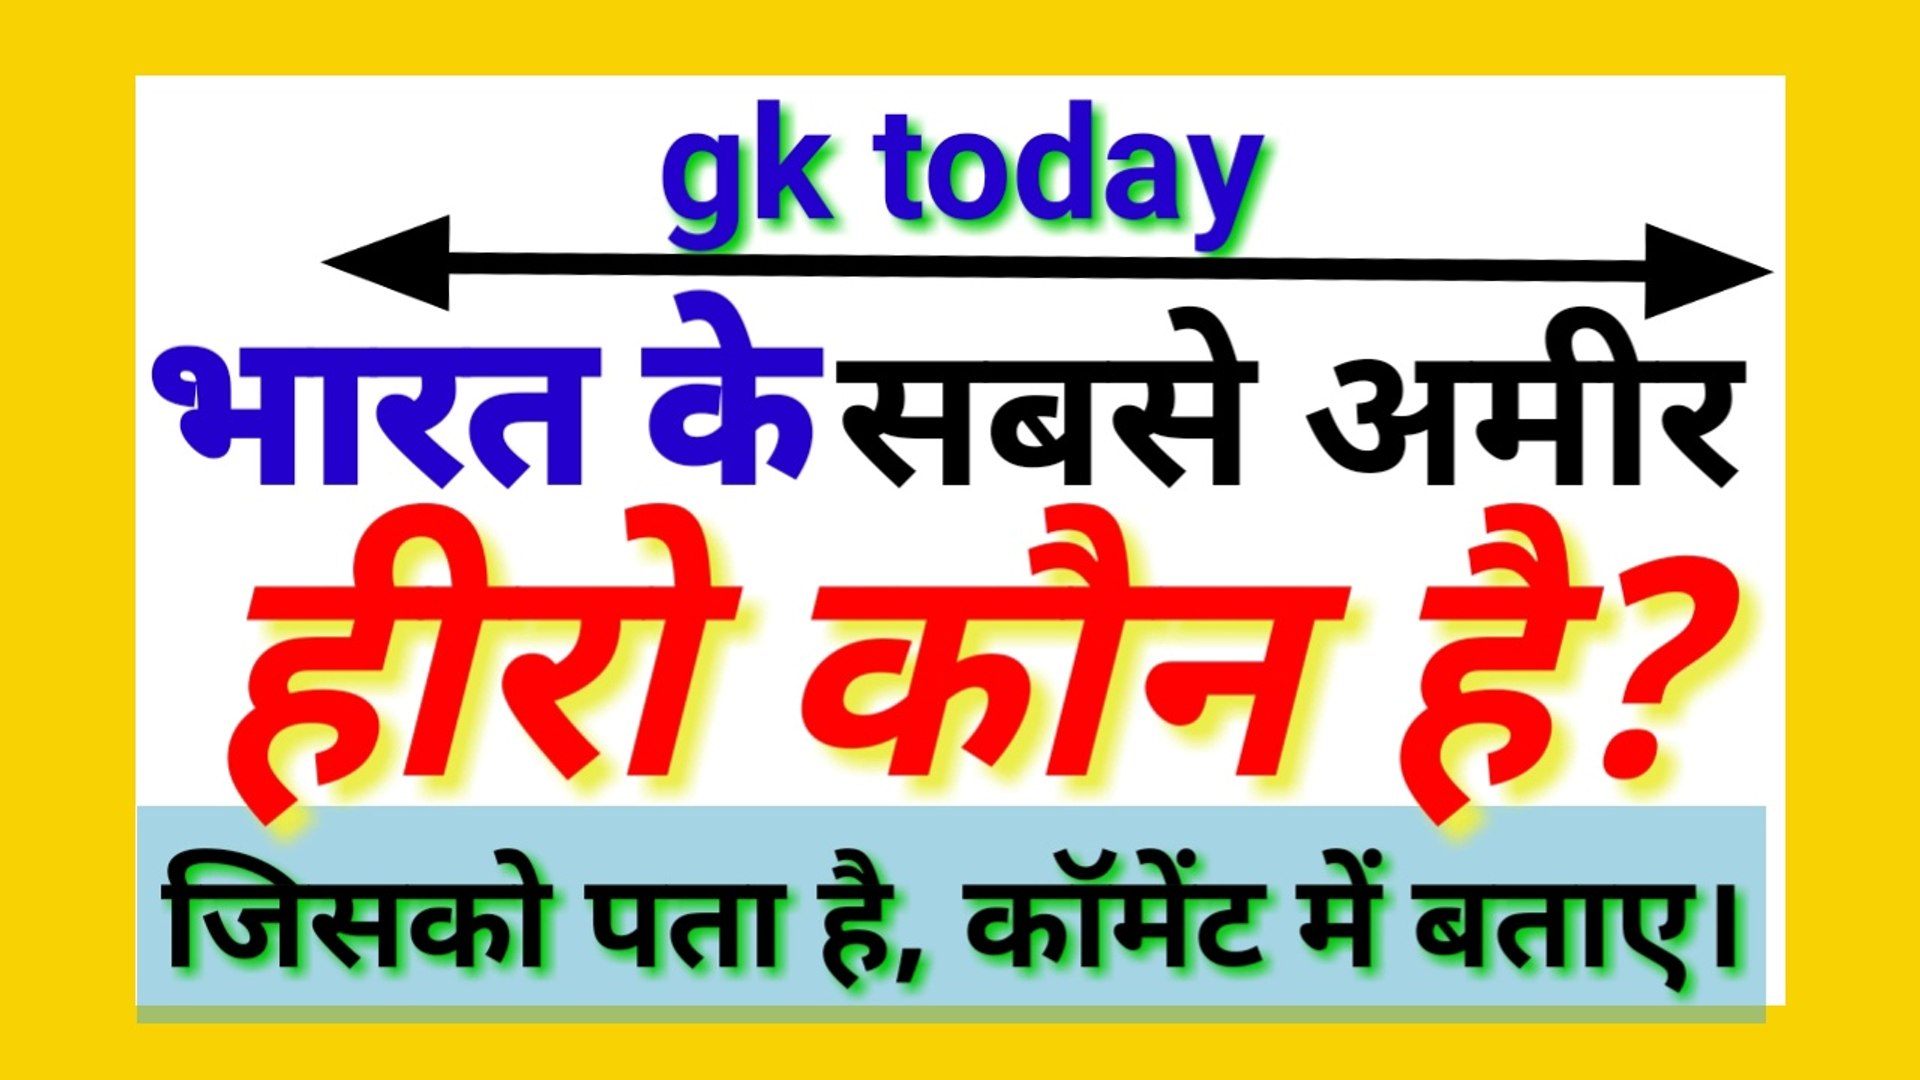 Daily Gk Gktoday Gk Questions And Answers Gk In Hindi Gk